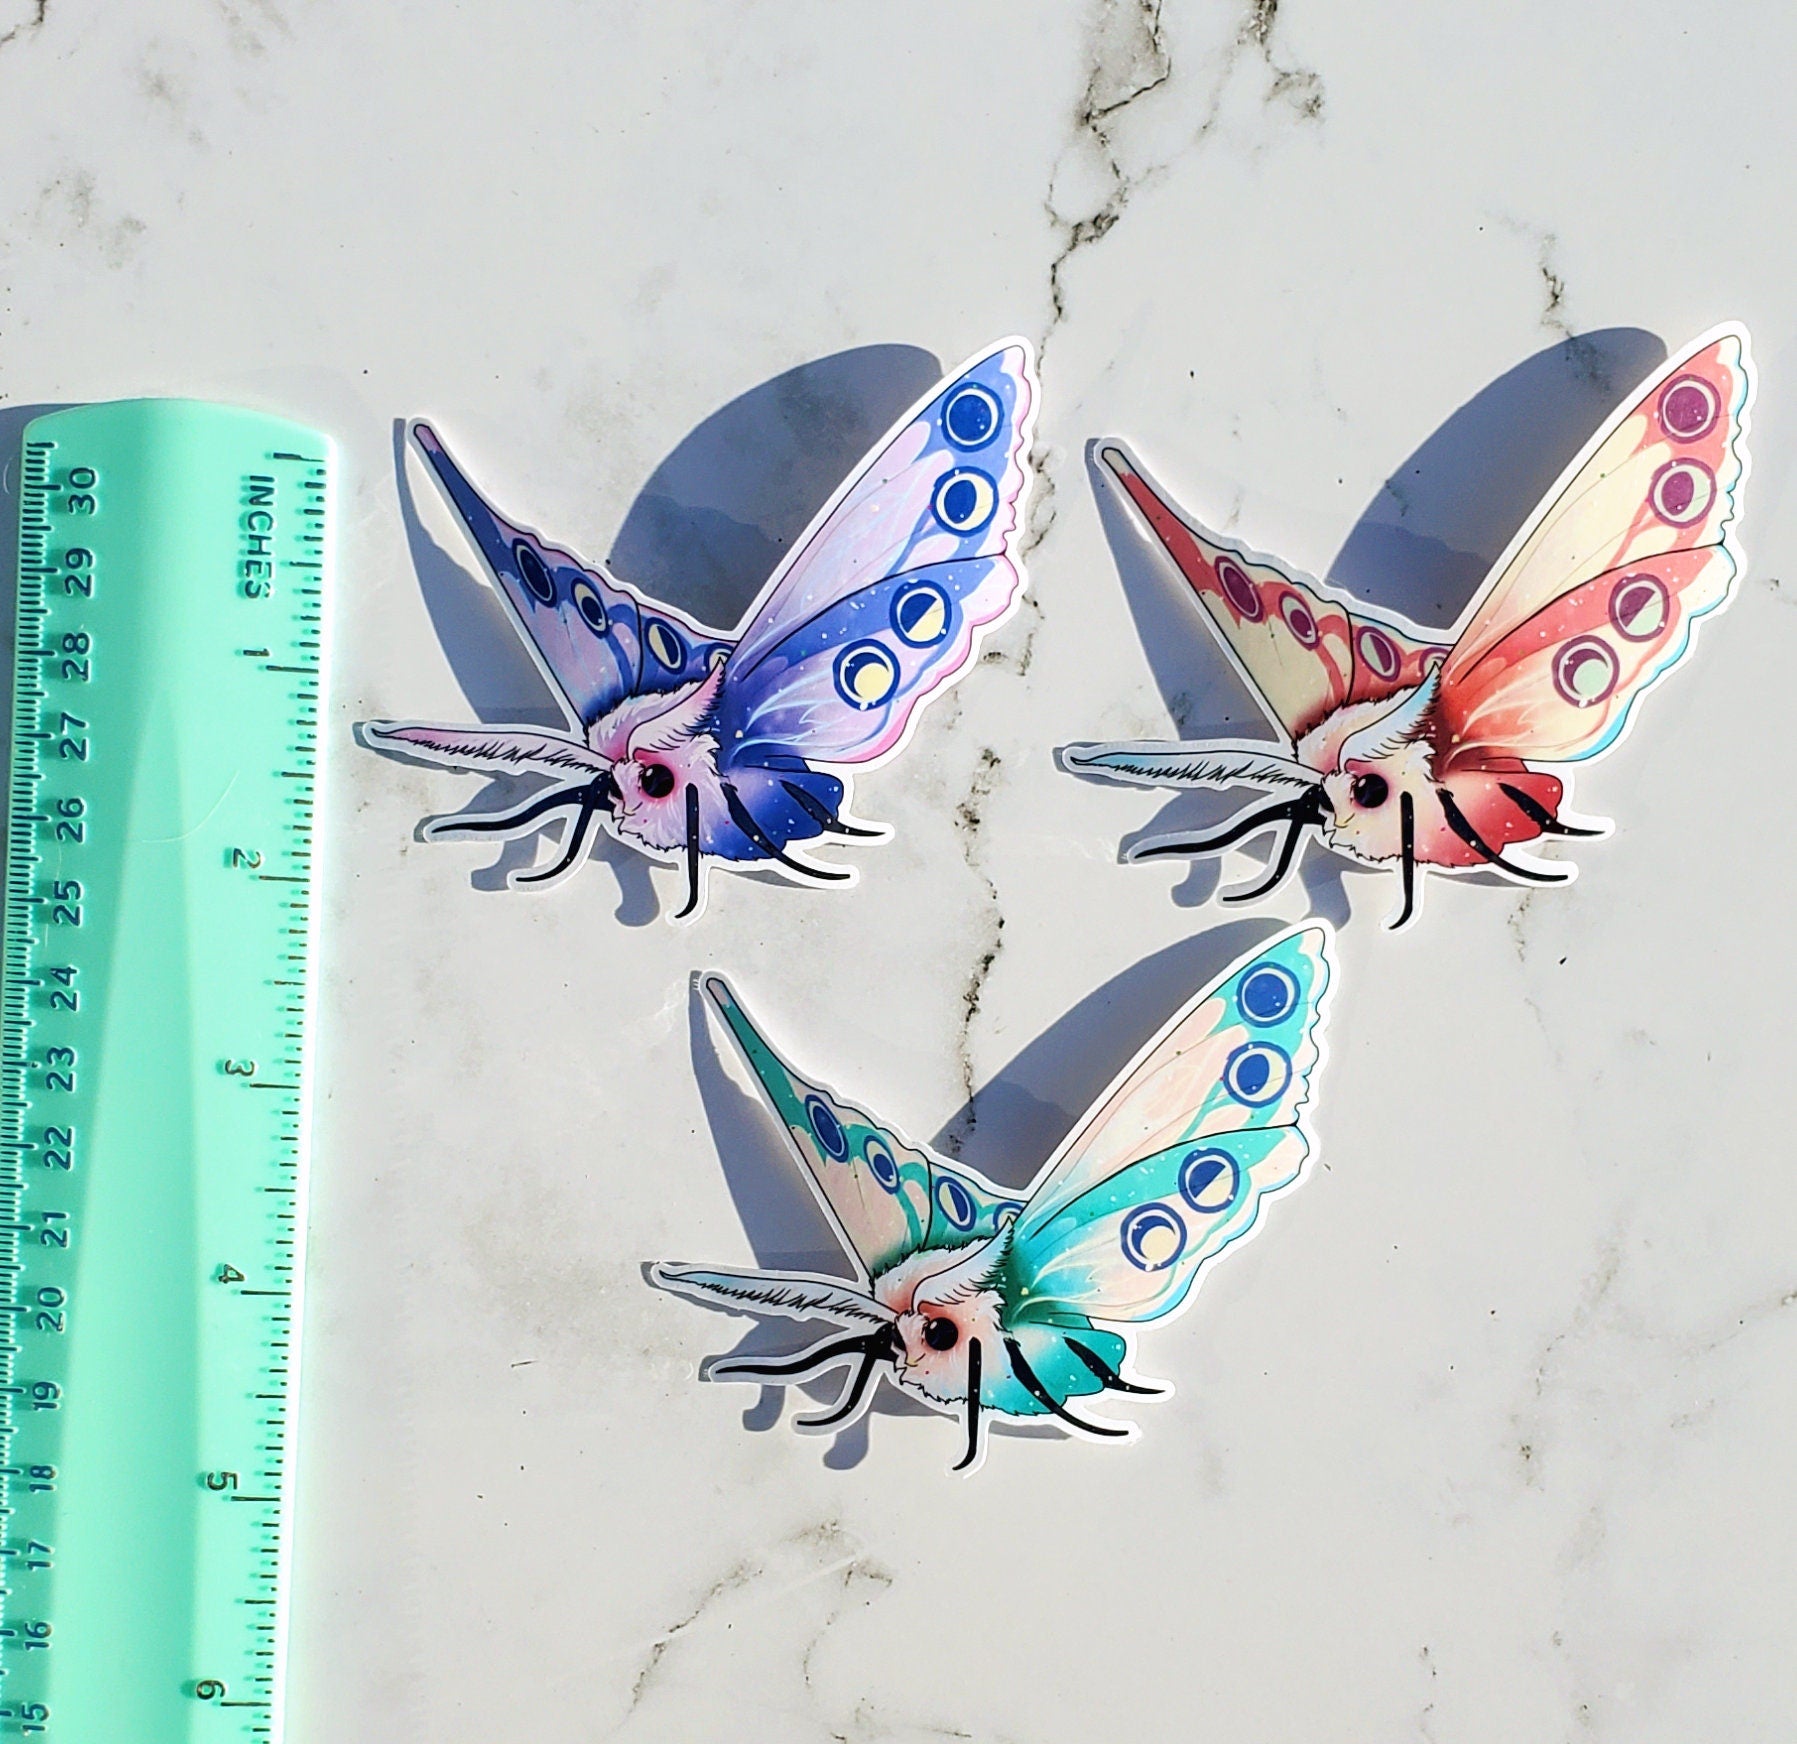 Mystic Moth Stickers 3 pack